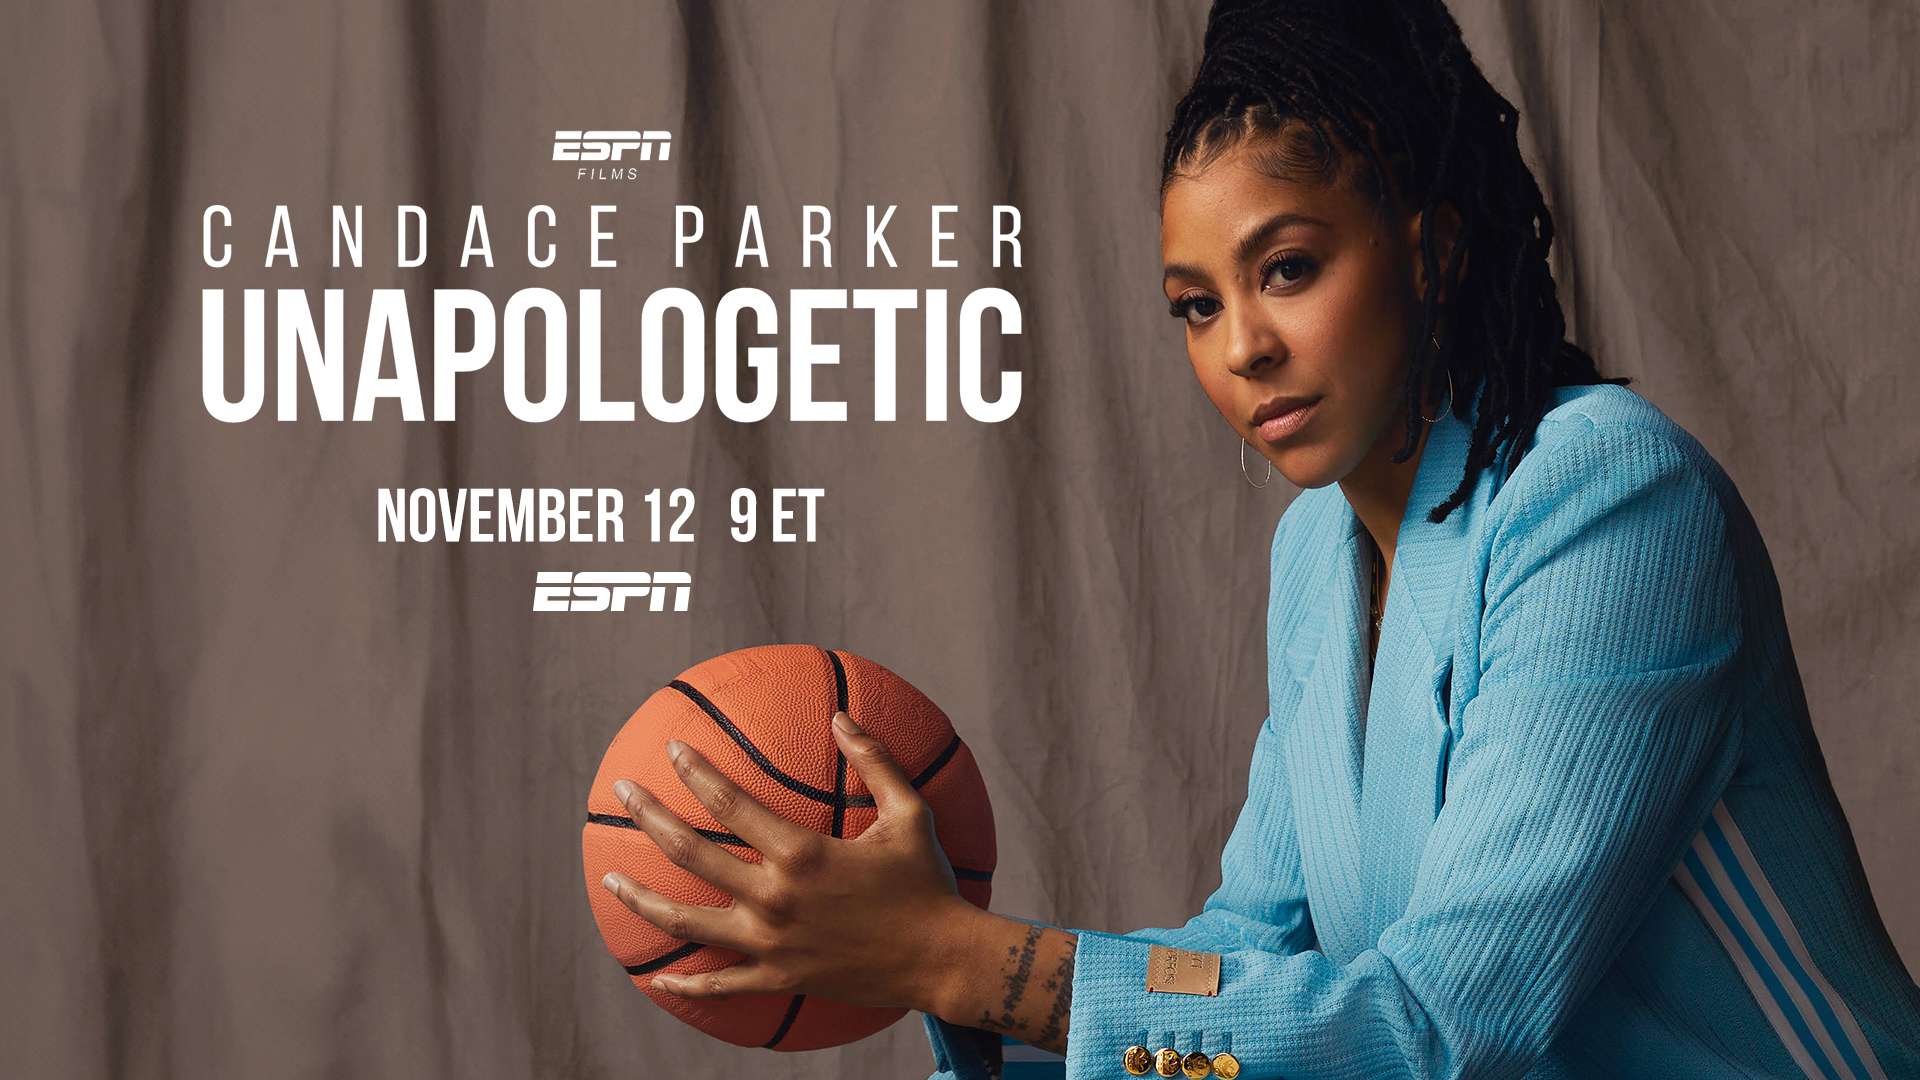 ESPN Films' "Candace Parker: Unapologetic" About WNBA Superstar to Debut November 12 at 9 p.m